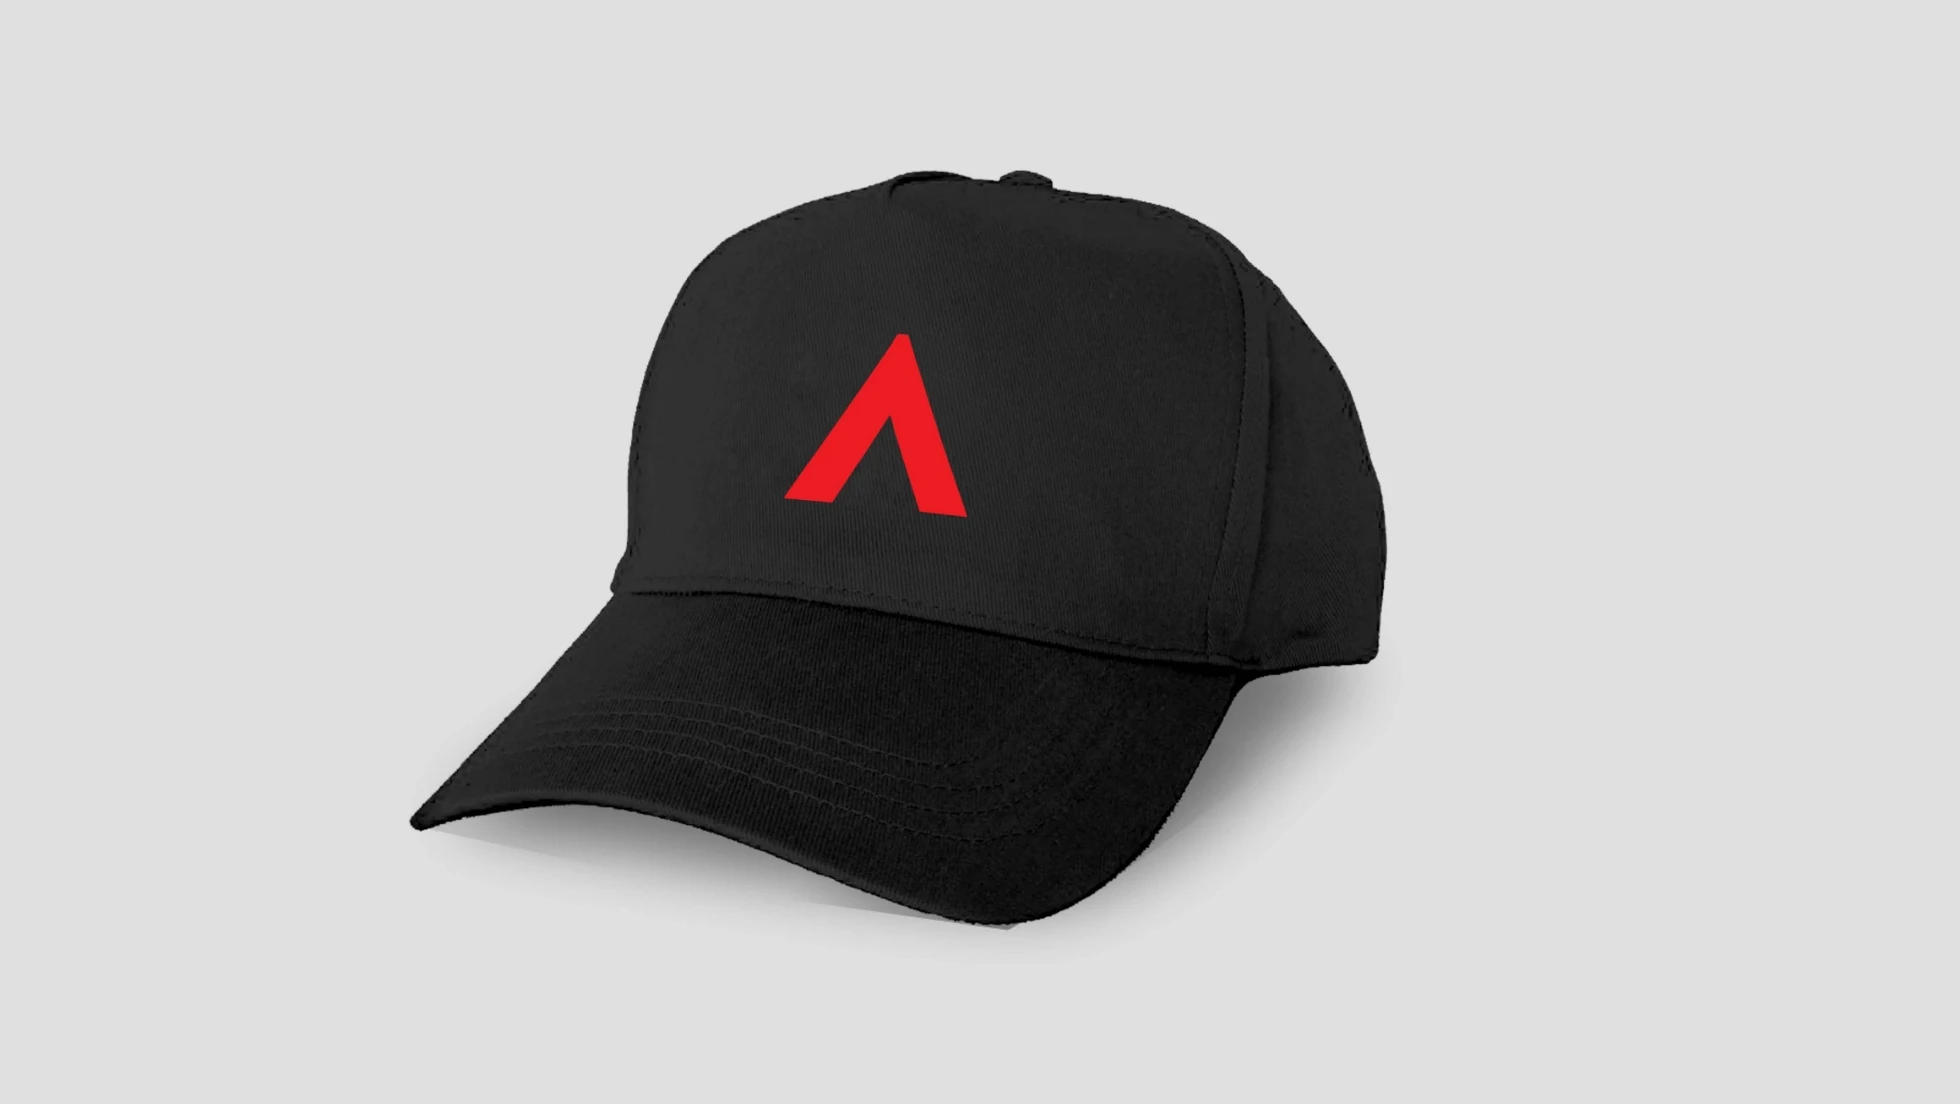 A black baseball cap with a red letter a on it.